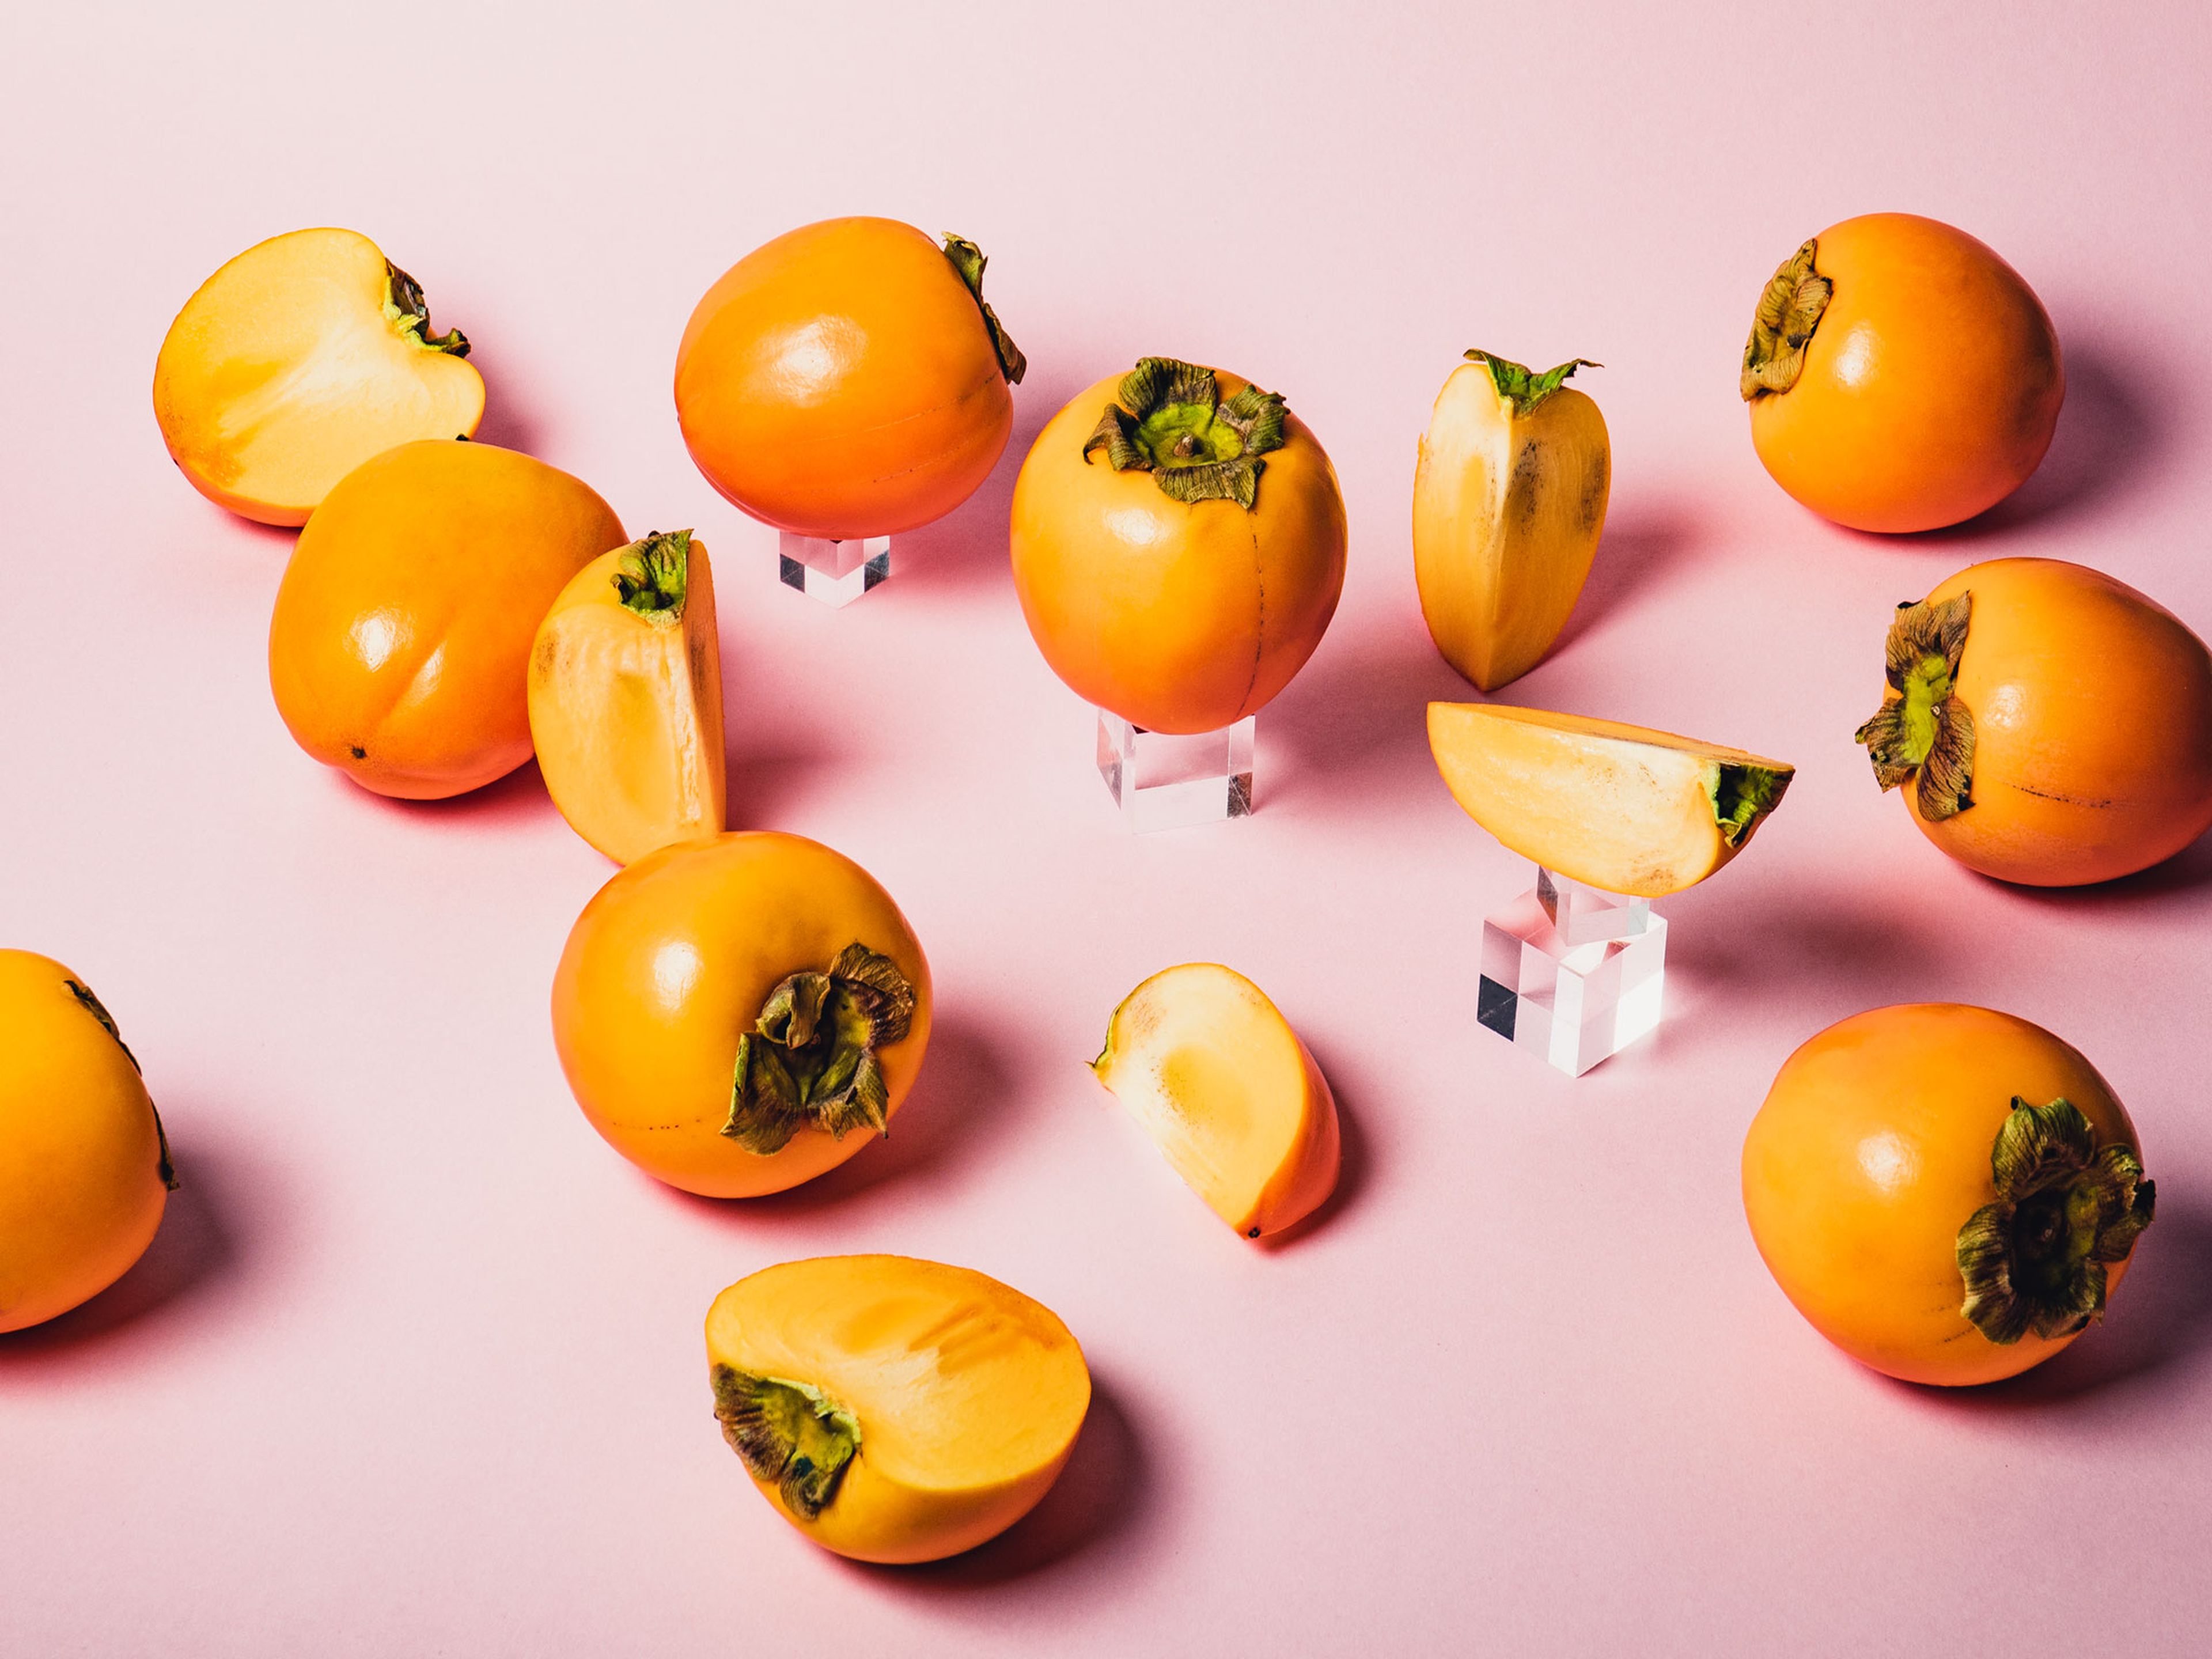 Now in Season: Everything to Know About Shopping, Storing, and Preparing In  Season Persimmon, Stories